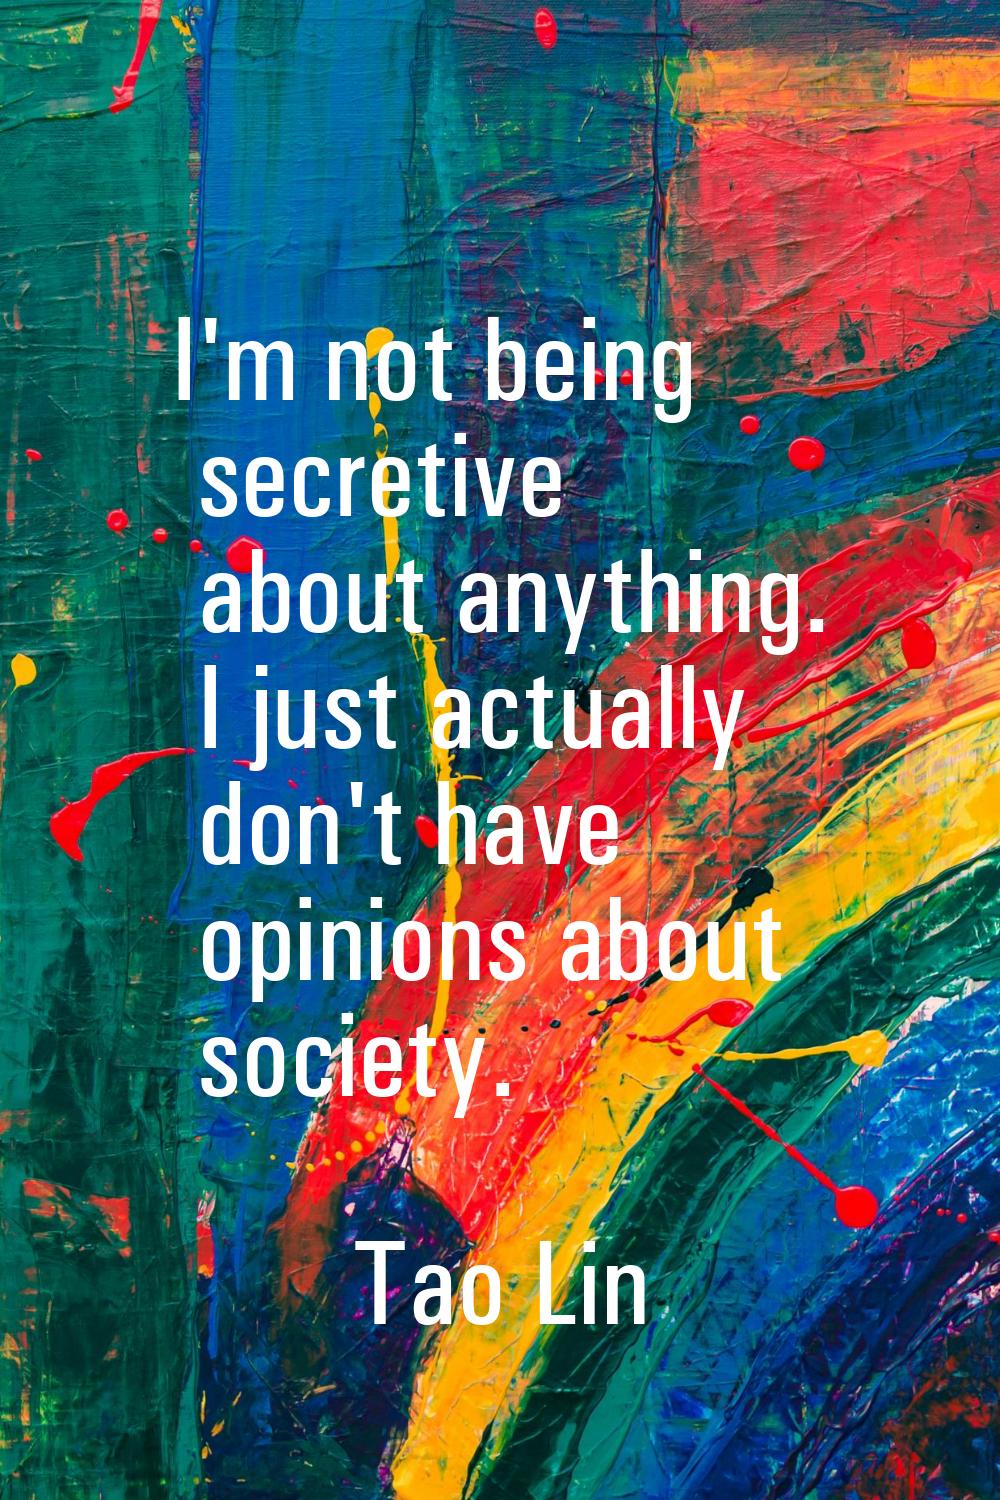 I'm not being secretive about anything. I just actually don't have opinions about society.